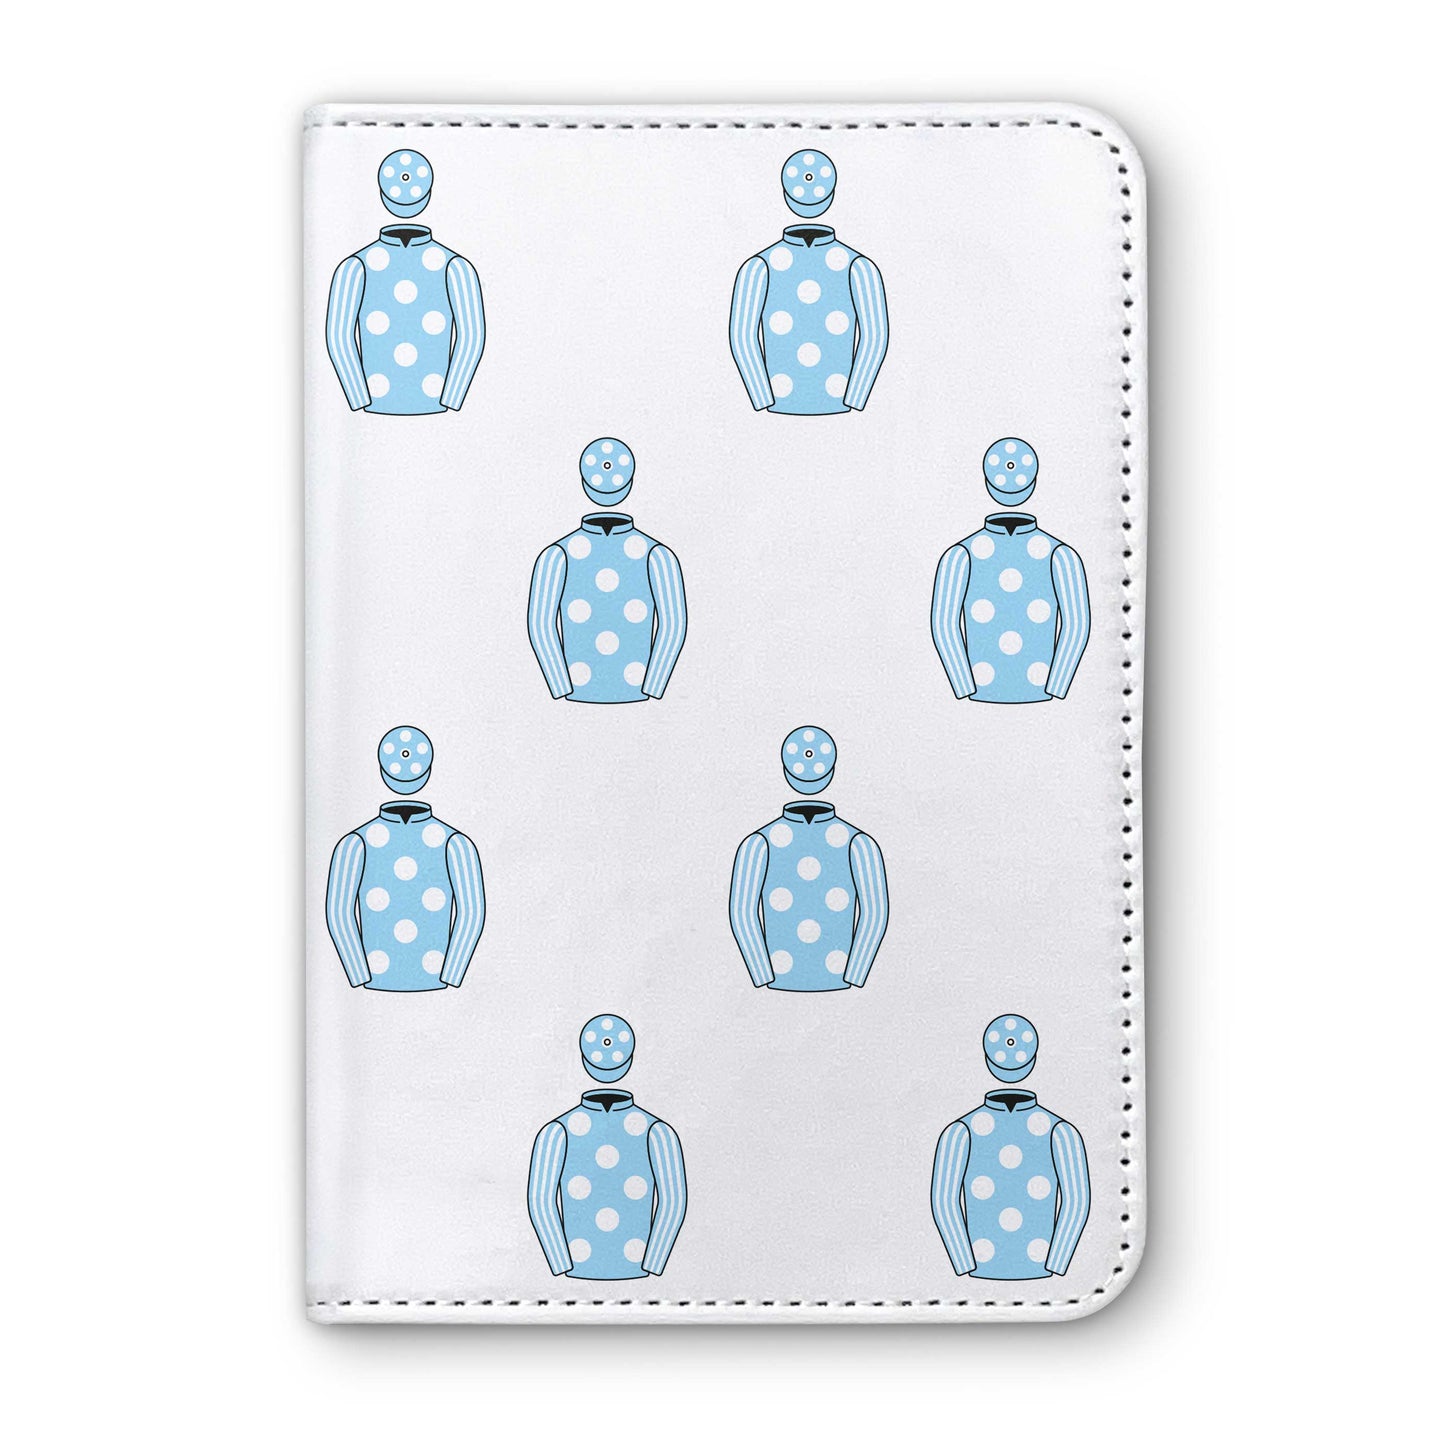 Kenneth Alexander Horse Racing Passport Holder - Hacked Up Horse Racing Gifts